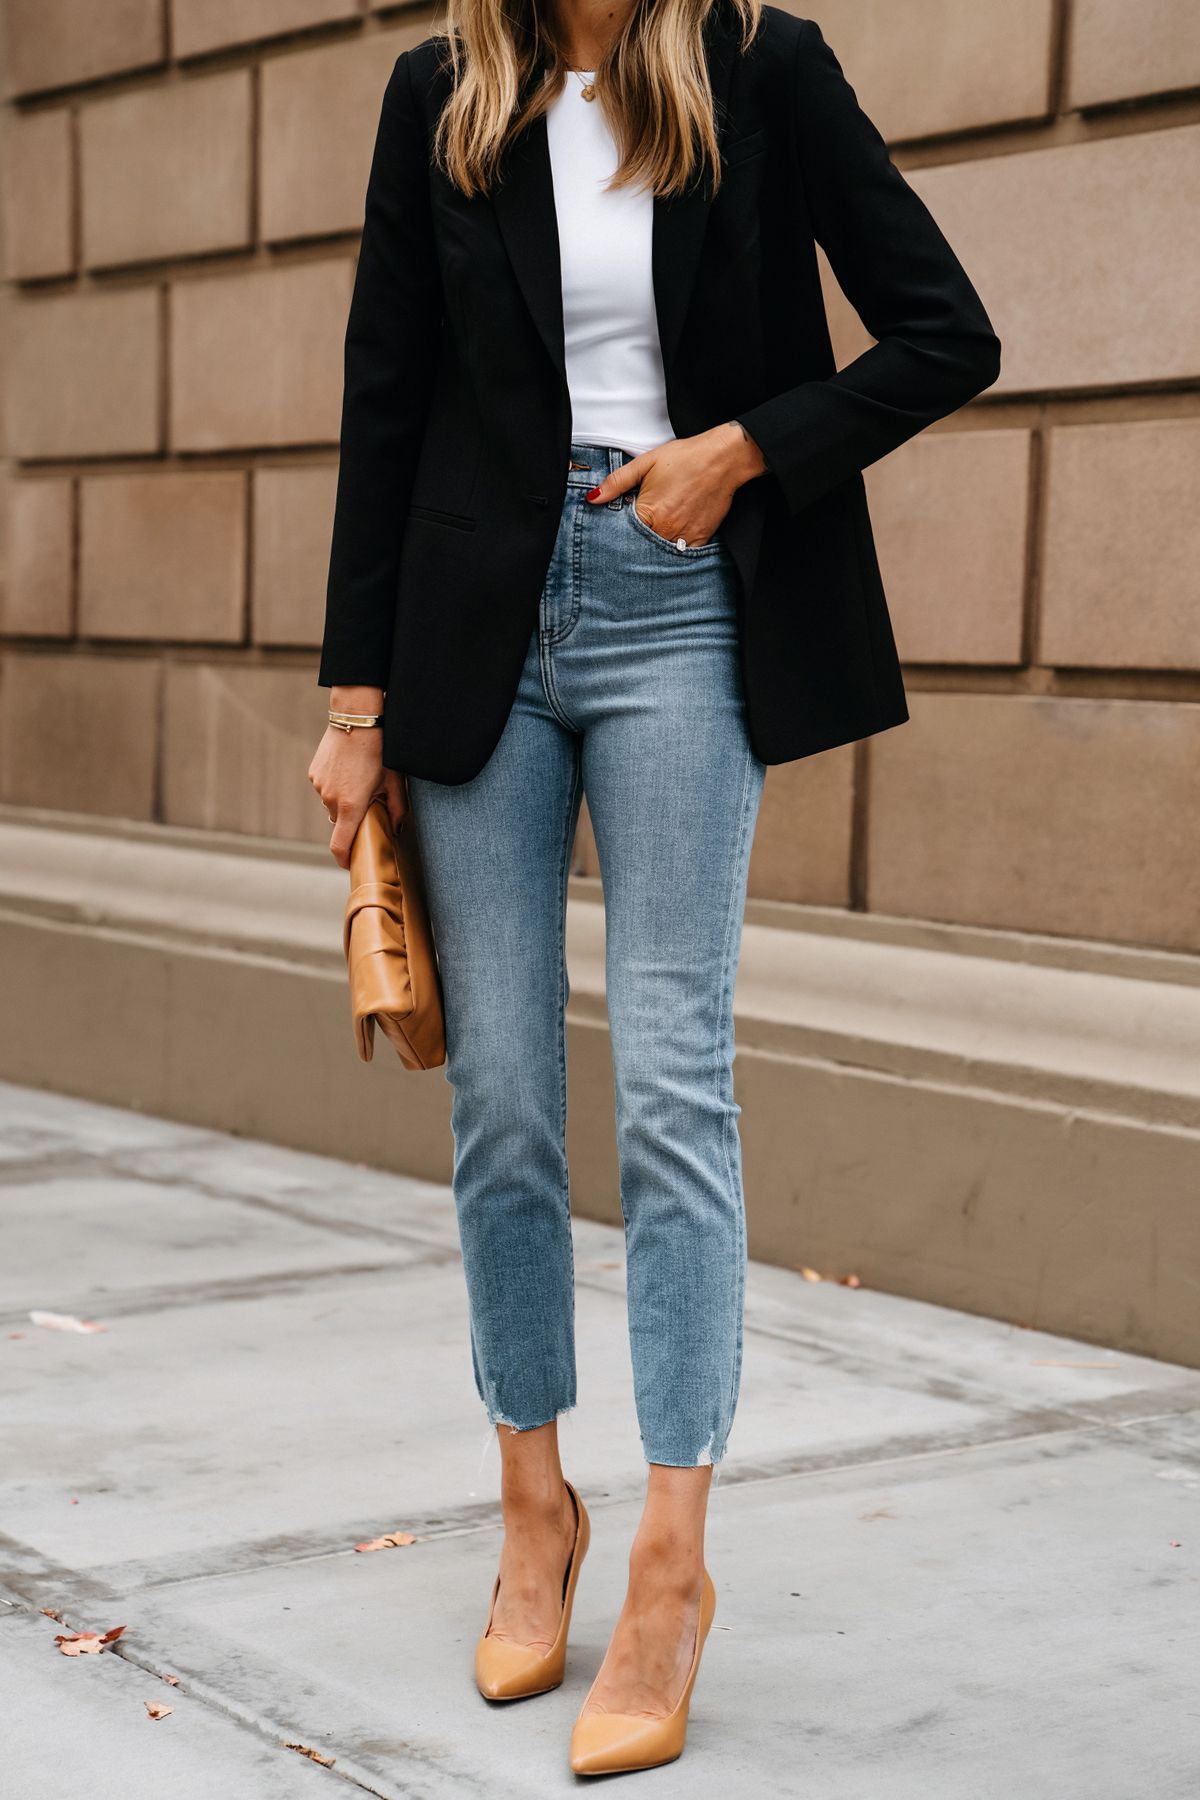 Sleek and Sophisticated: Elevate Your Look with Black Blazers